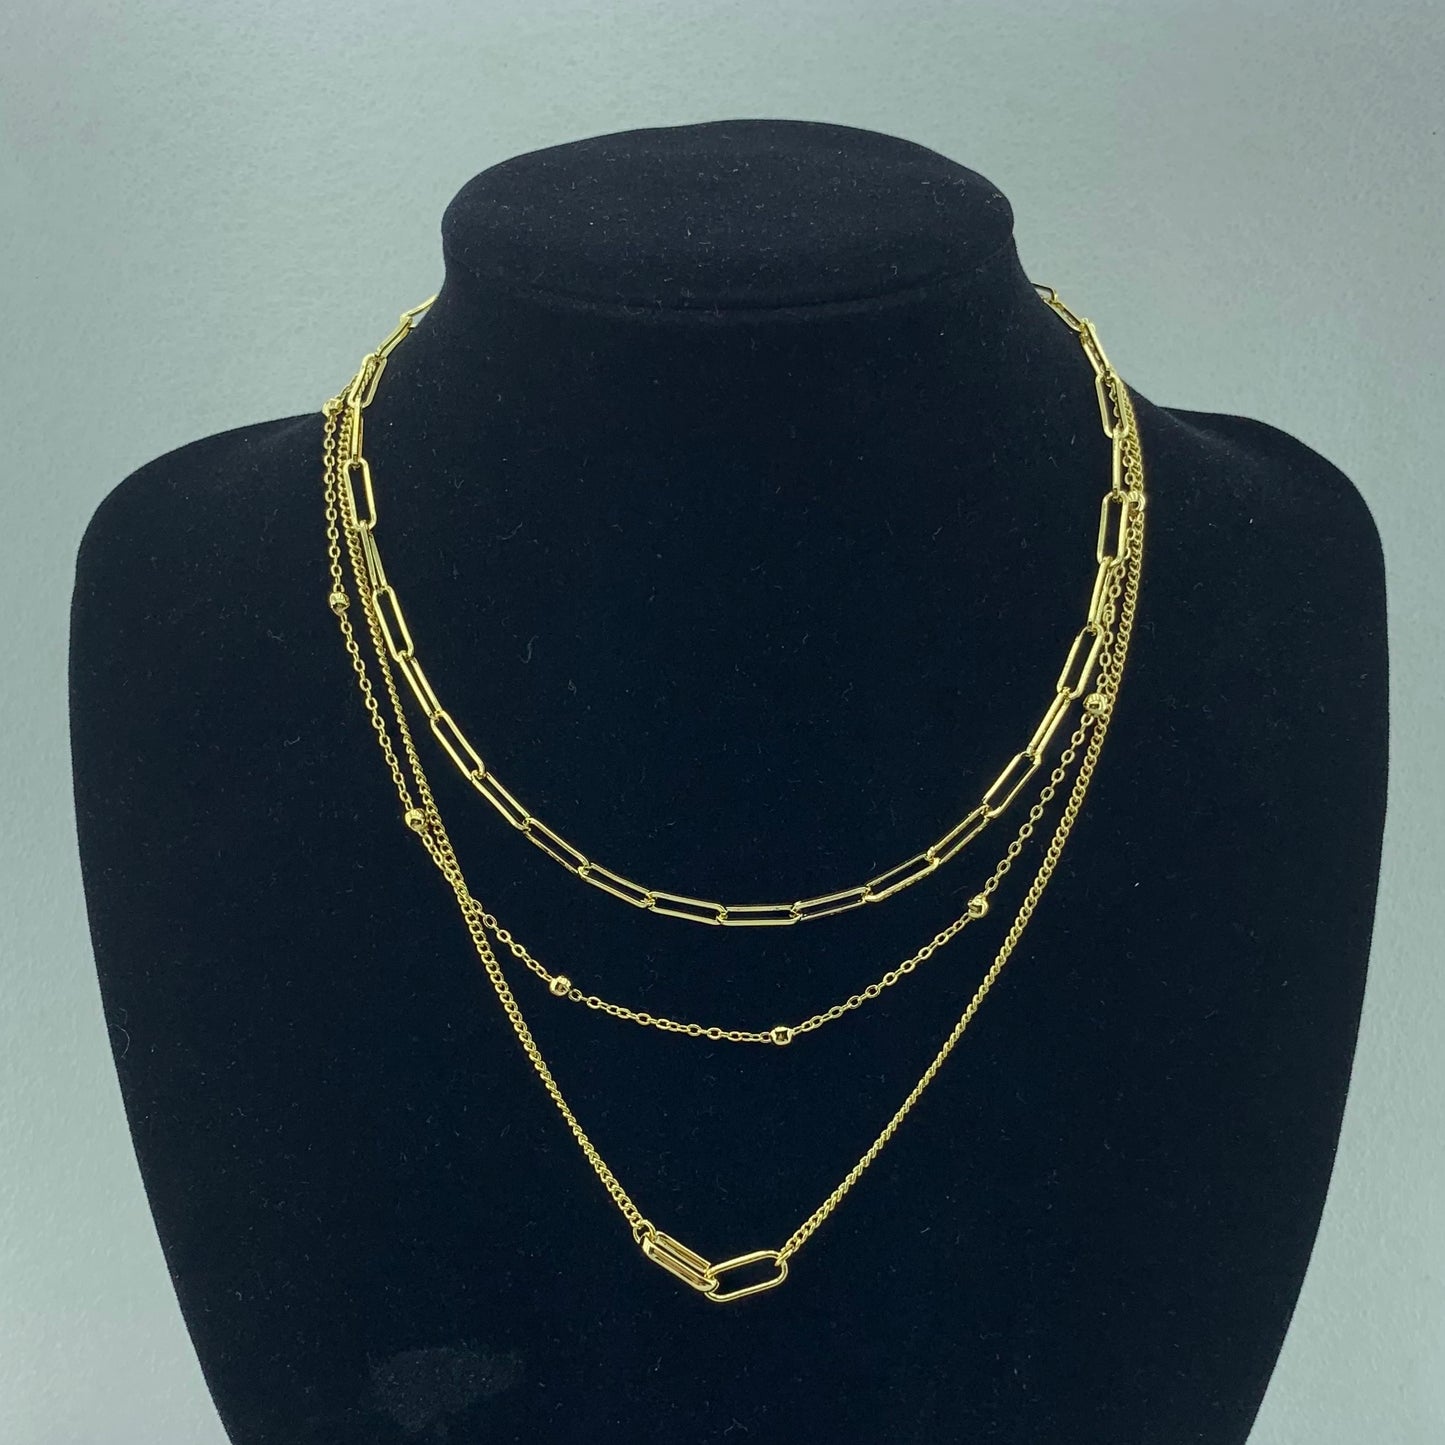 Women's Fashion Multiple Layered Chain Necklace